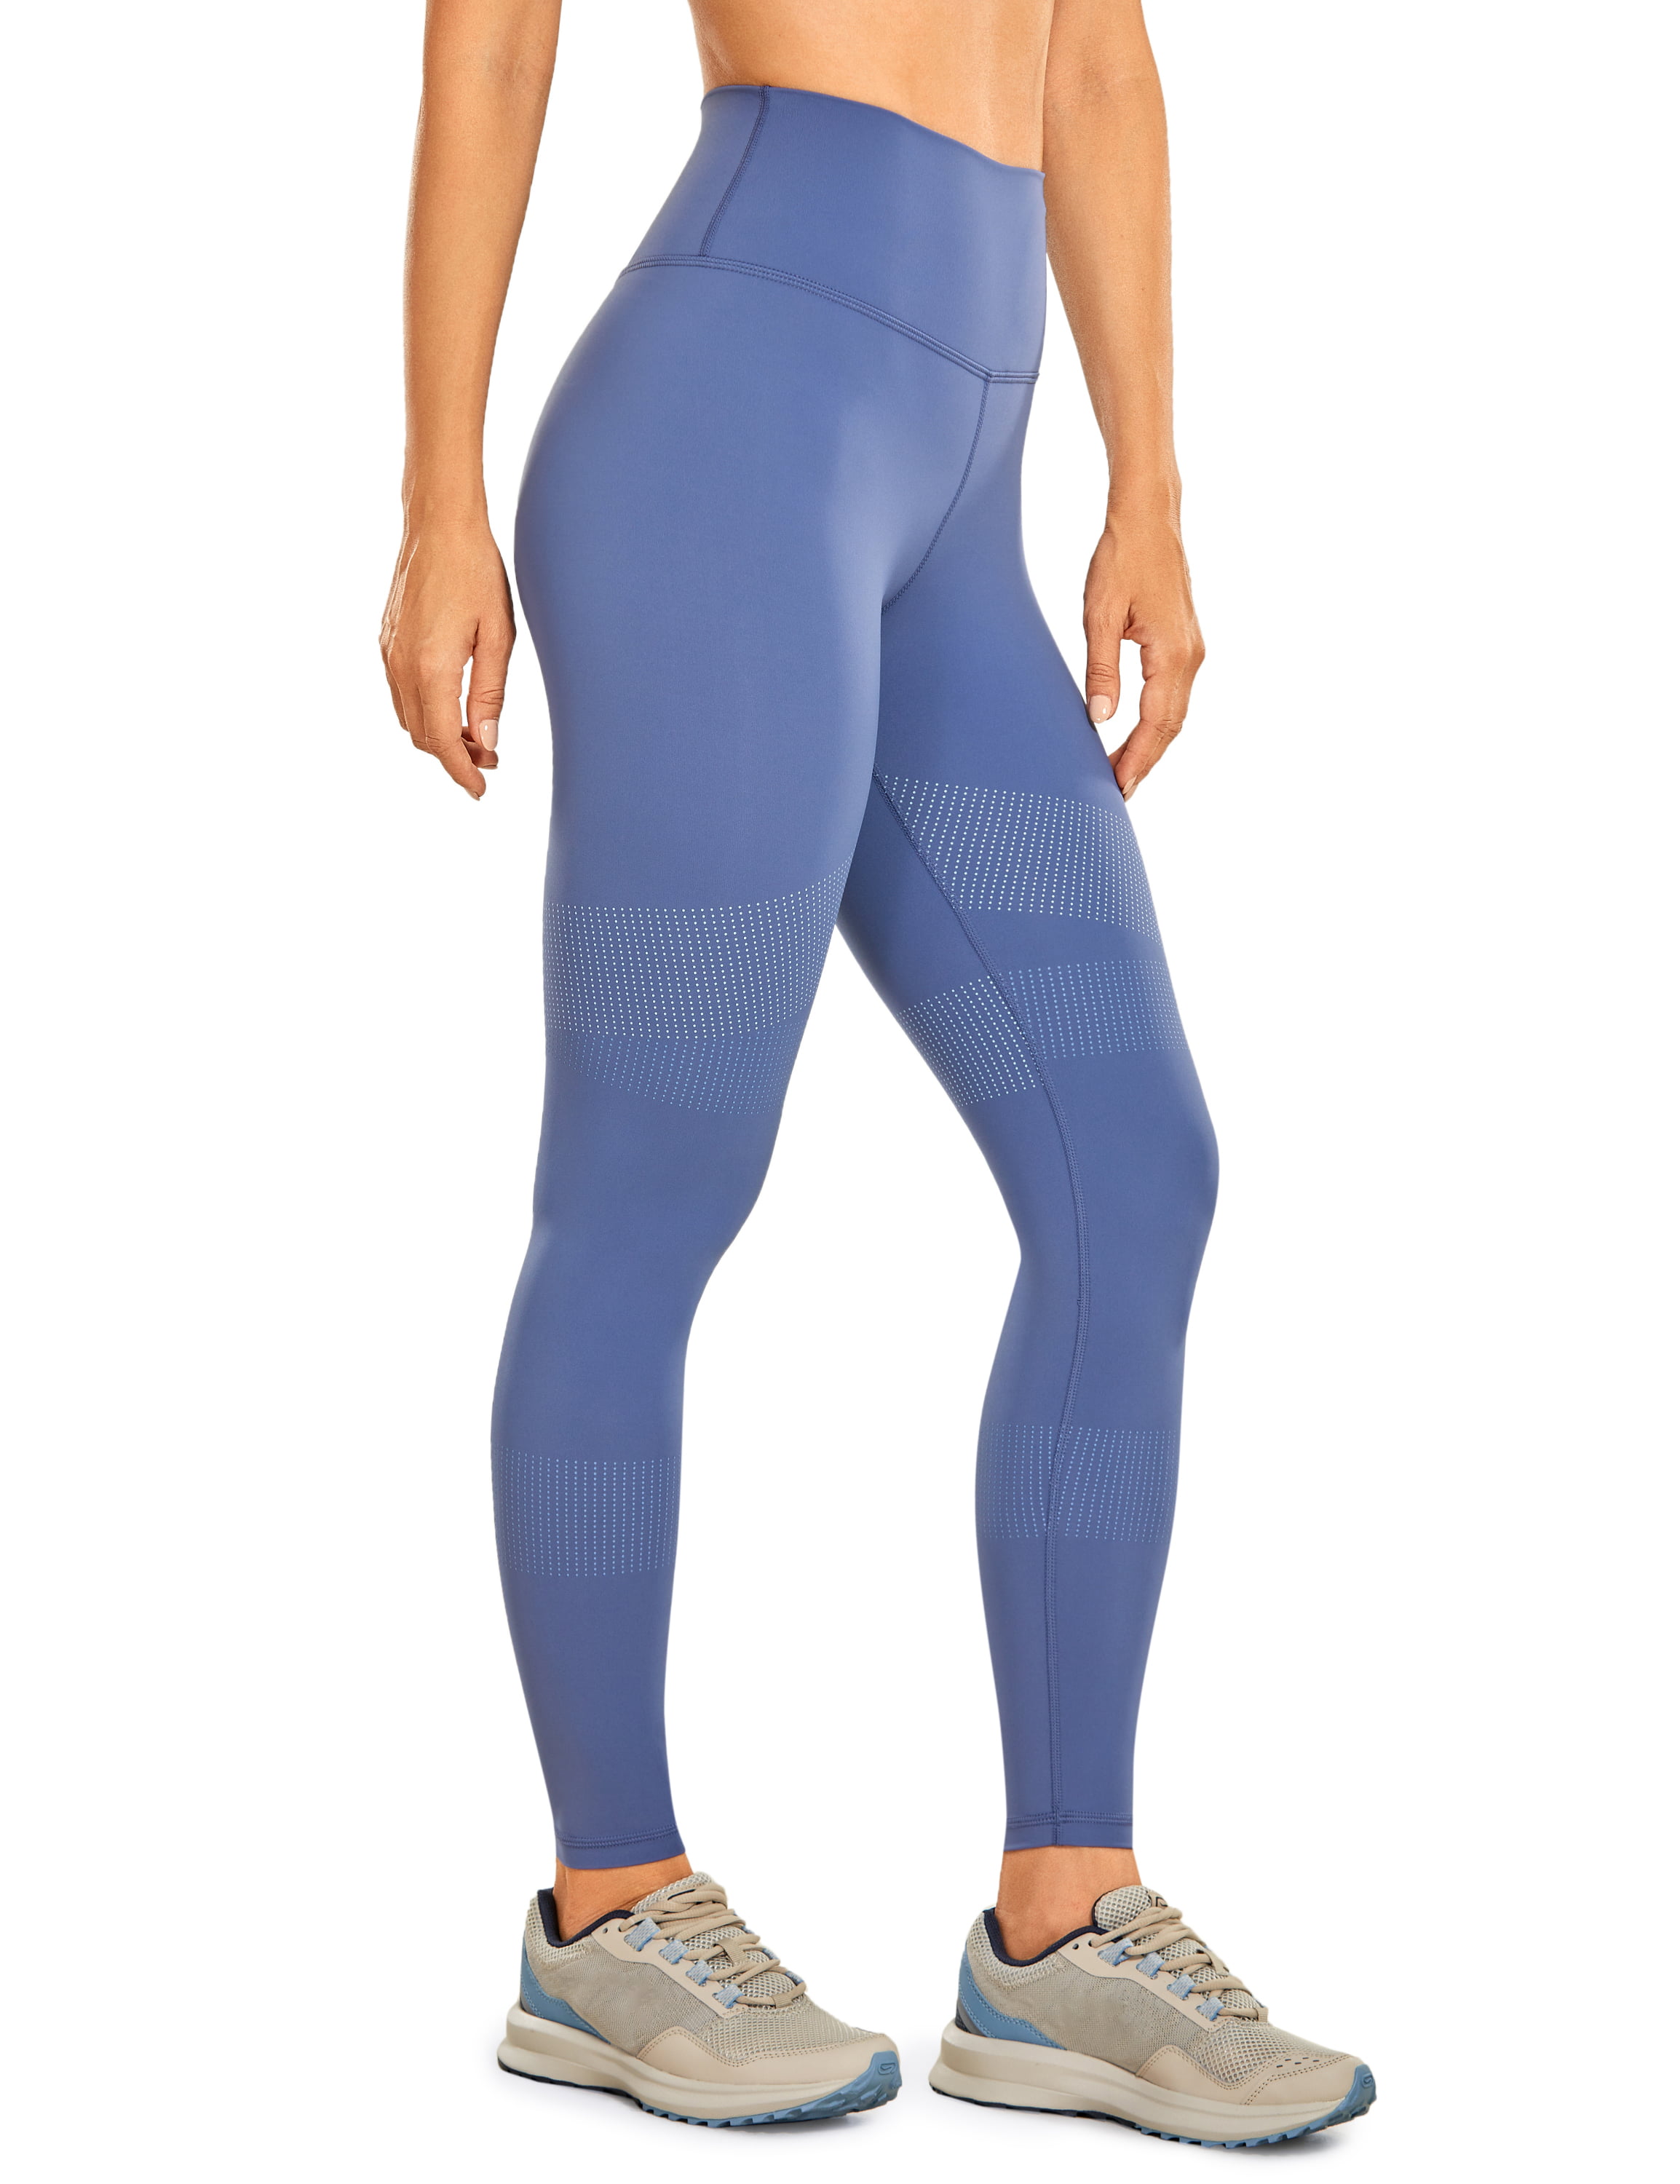 Under Armour Yoga Pants Porn - CRZ YGOA Women's Naked Feeling Workout Leggings 25 Inches - High Waisted  Athletic Yoga Pants Buttery Soft - Walmart.com